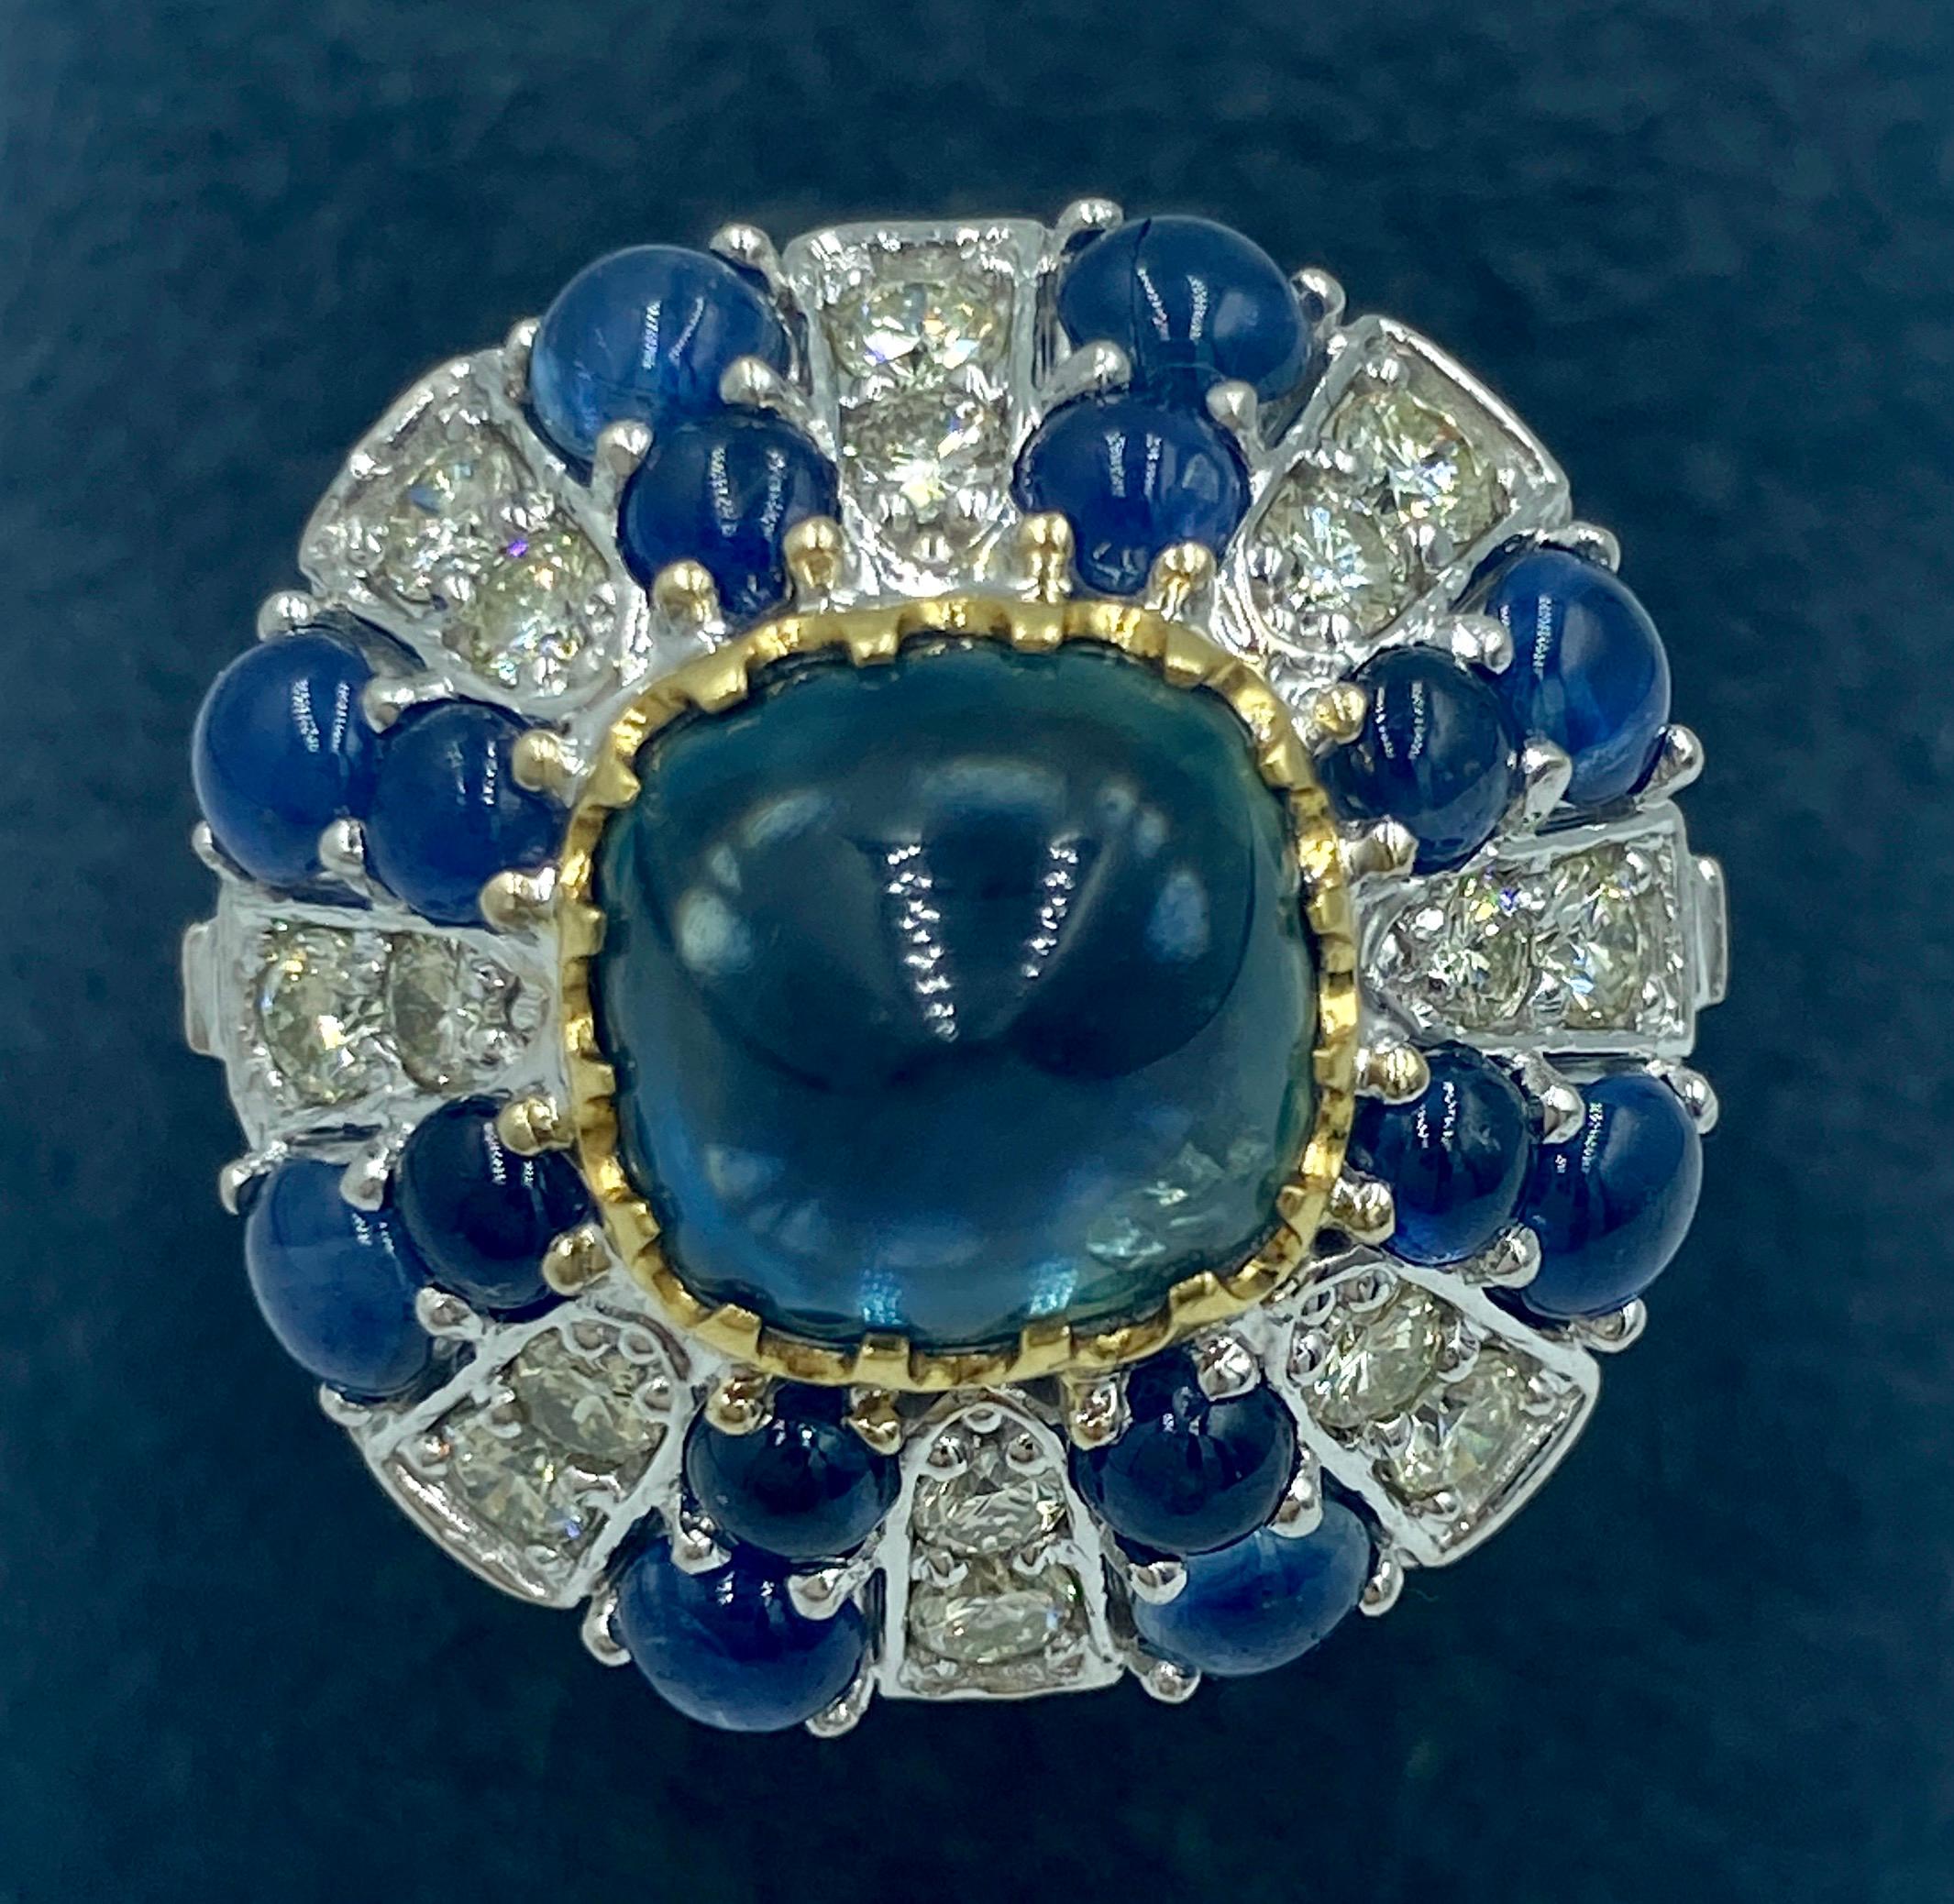 This 1950s European 18k gold cocktail ring features a central no heat sugarloaf cabochon sapphire which weighs approximately 3.5 carats and approximately 1 carat of diamonds. The smaller sapphires which adorn the ring weigh approximately 2 carats.